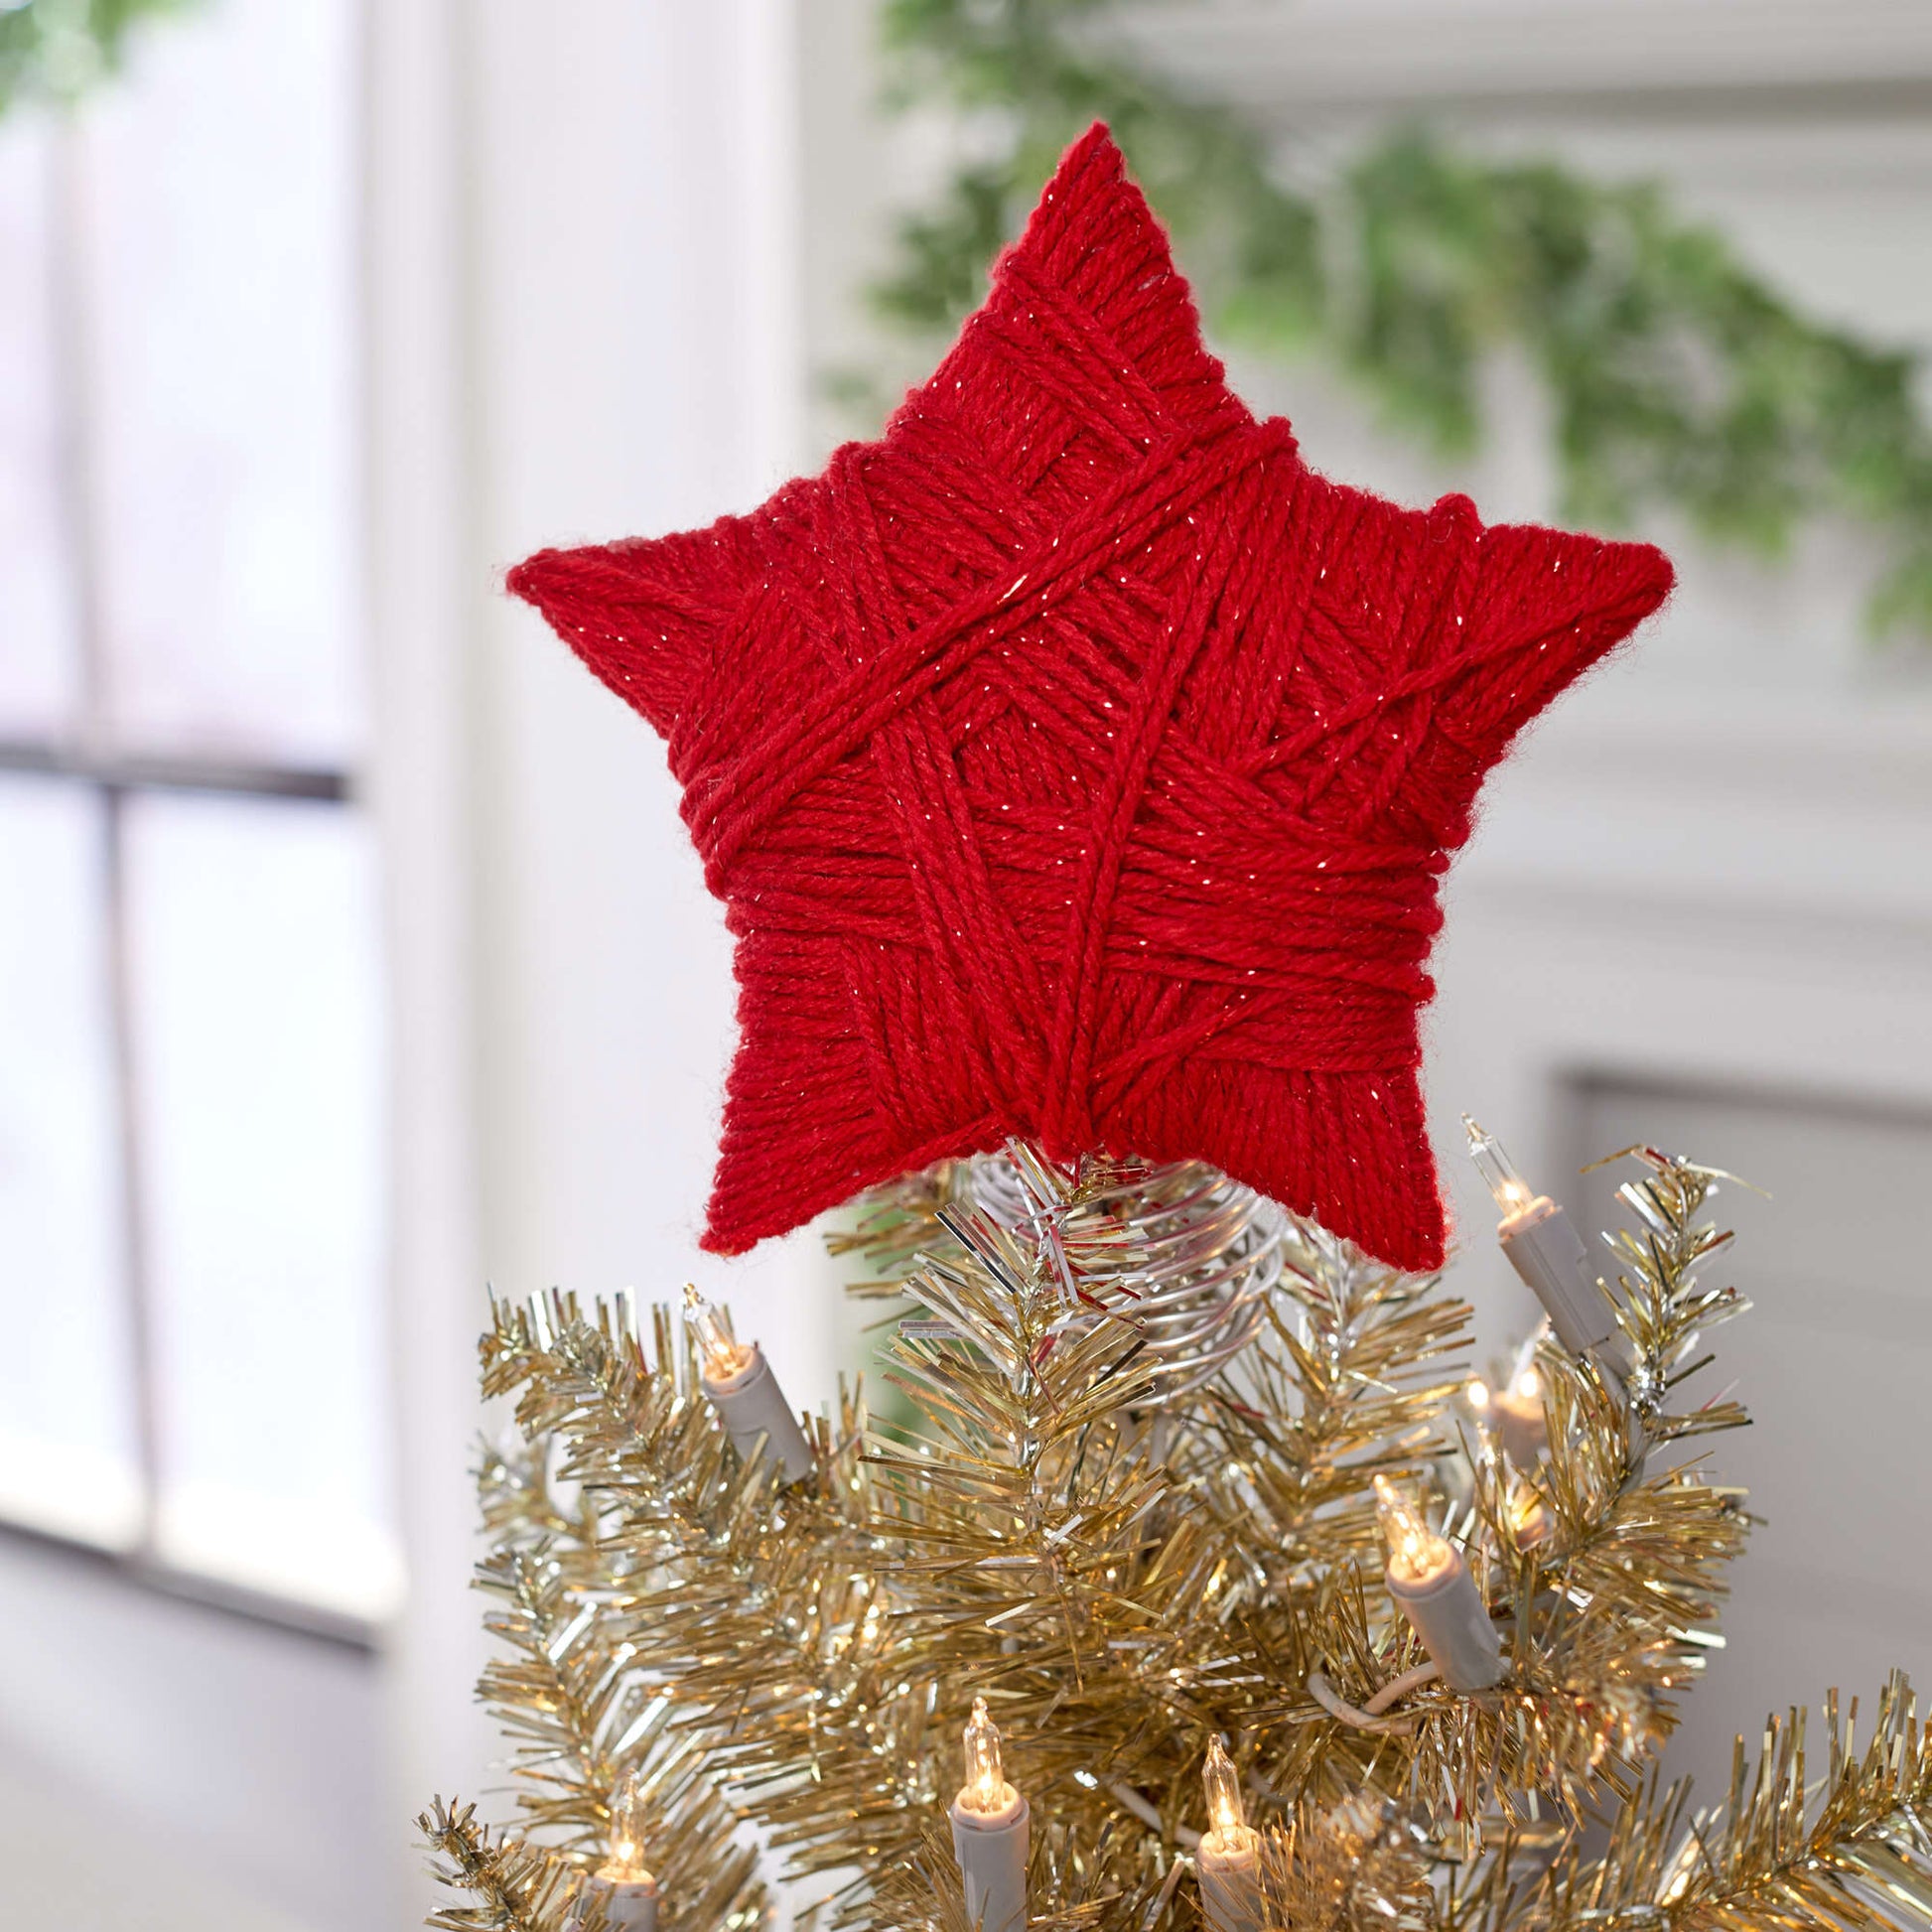 Red Heart Crafty Star Tree Topper Red Heart Crafty Star Tree Topper